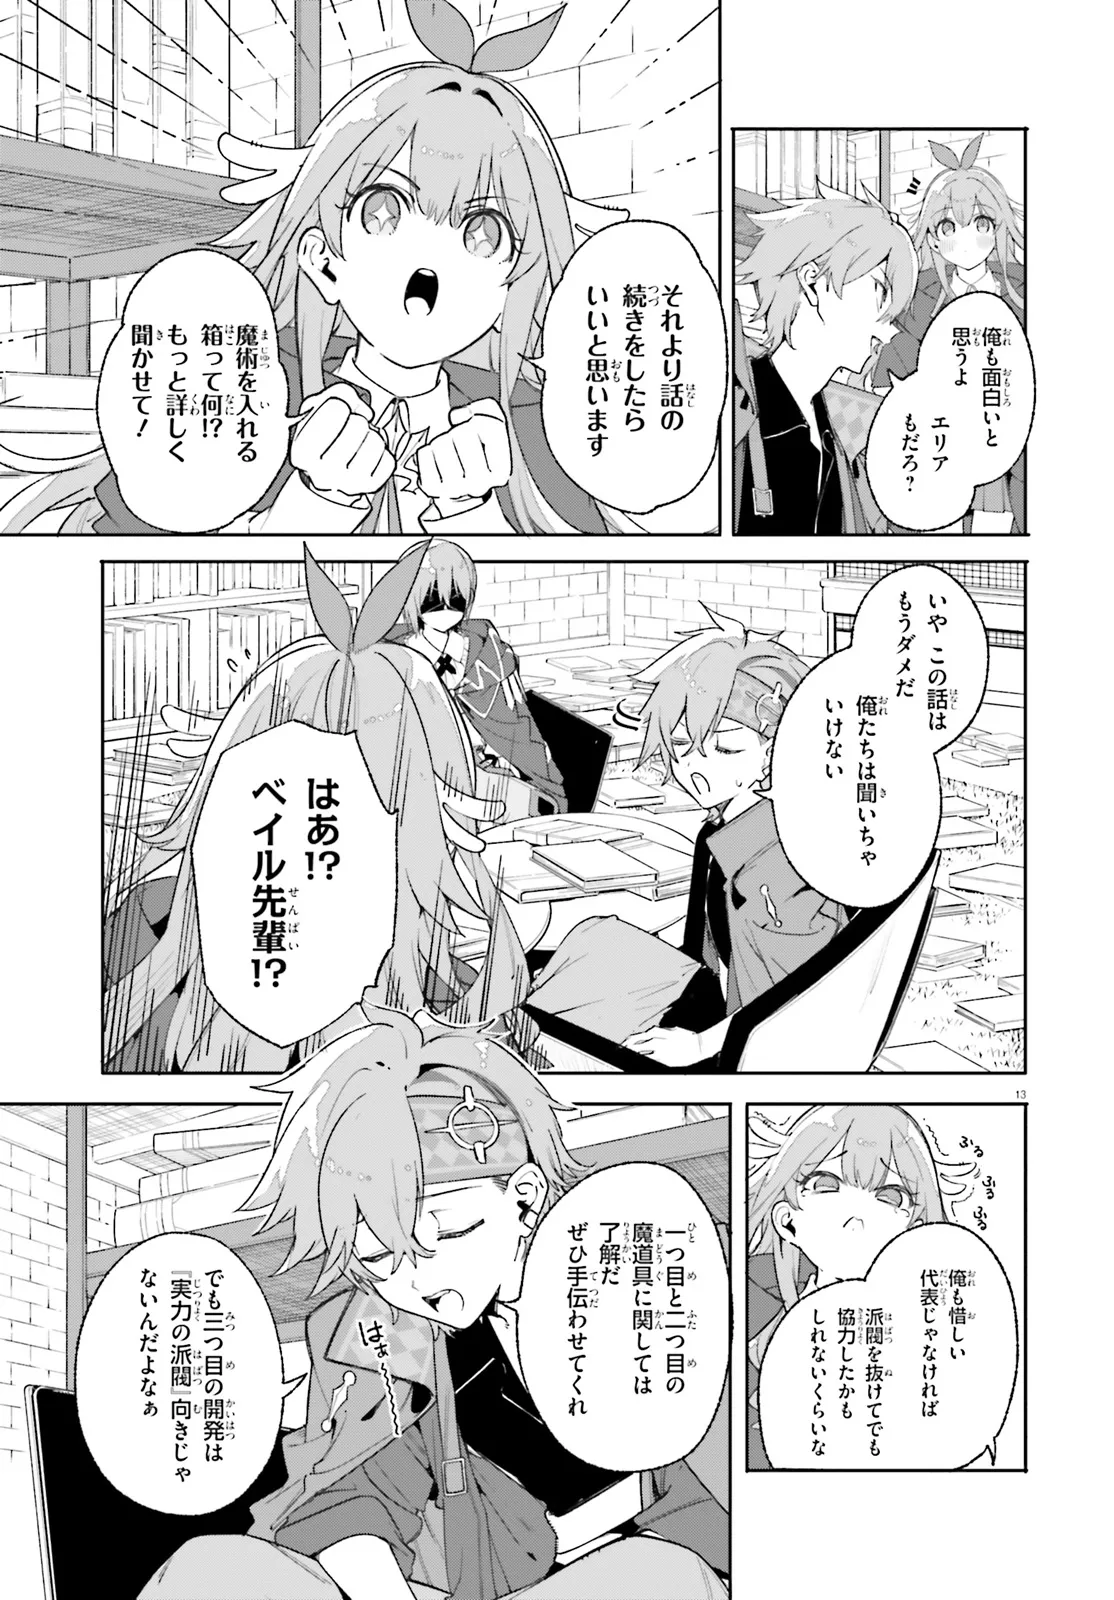 Kunon the Sorcerer Can See Kunon the Sorcerer Can See Through 魔術師クノンは見えている 第26.2話 - Page 3